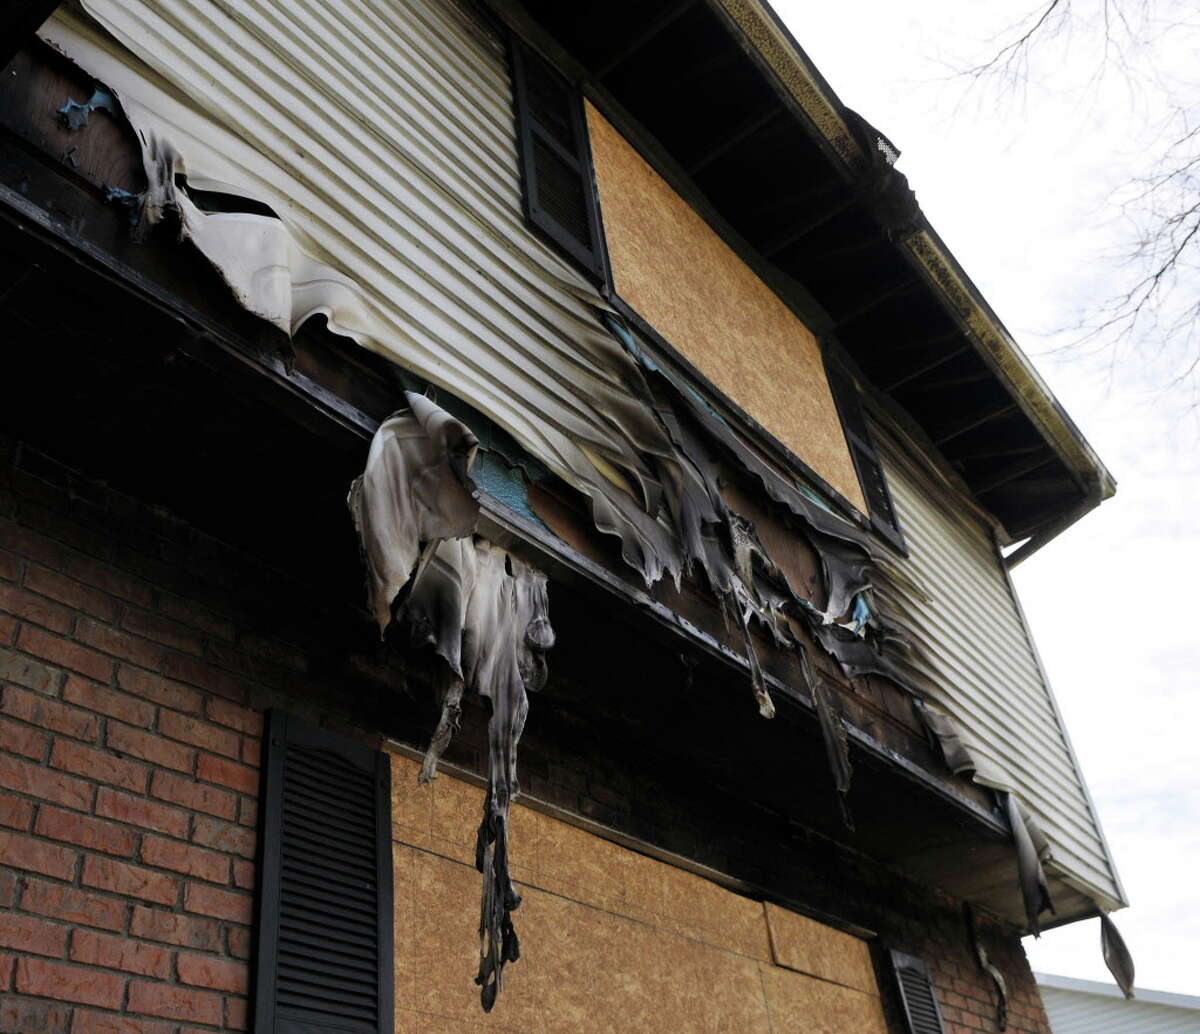 Melted panels hang from the fire damaged Schalren Drive home of Colonie police officer Israel Roman on Friday, April 29, 2016, in Colonie, N.Y. Roman set his house on fire and shot his wife, son and himself. Neighbors complain about the eyesore and fire debris, but town officials said it could be years before the property gets cleaned up because Roman had no will and there are uncertainties about the insurance. (Brittany Gregory / Special to the Times Union)